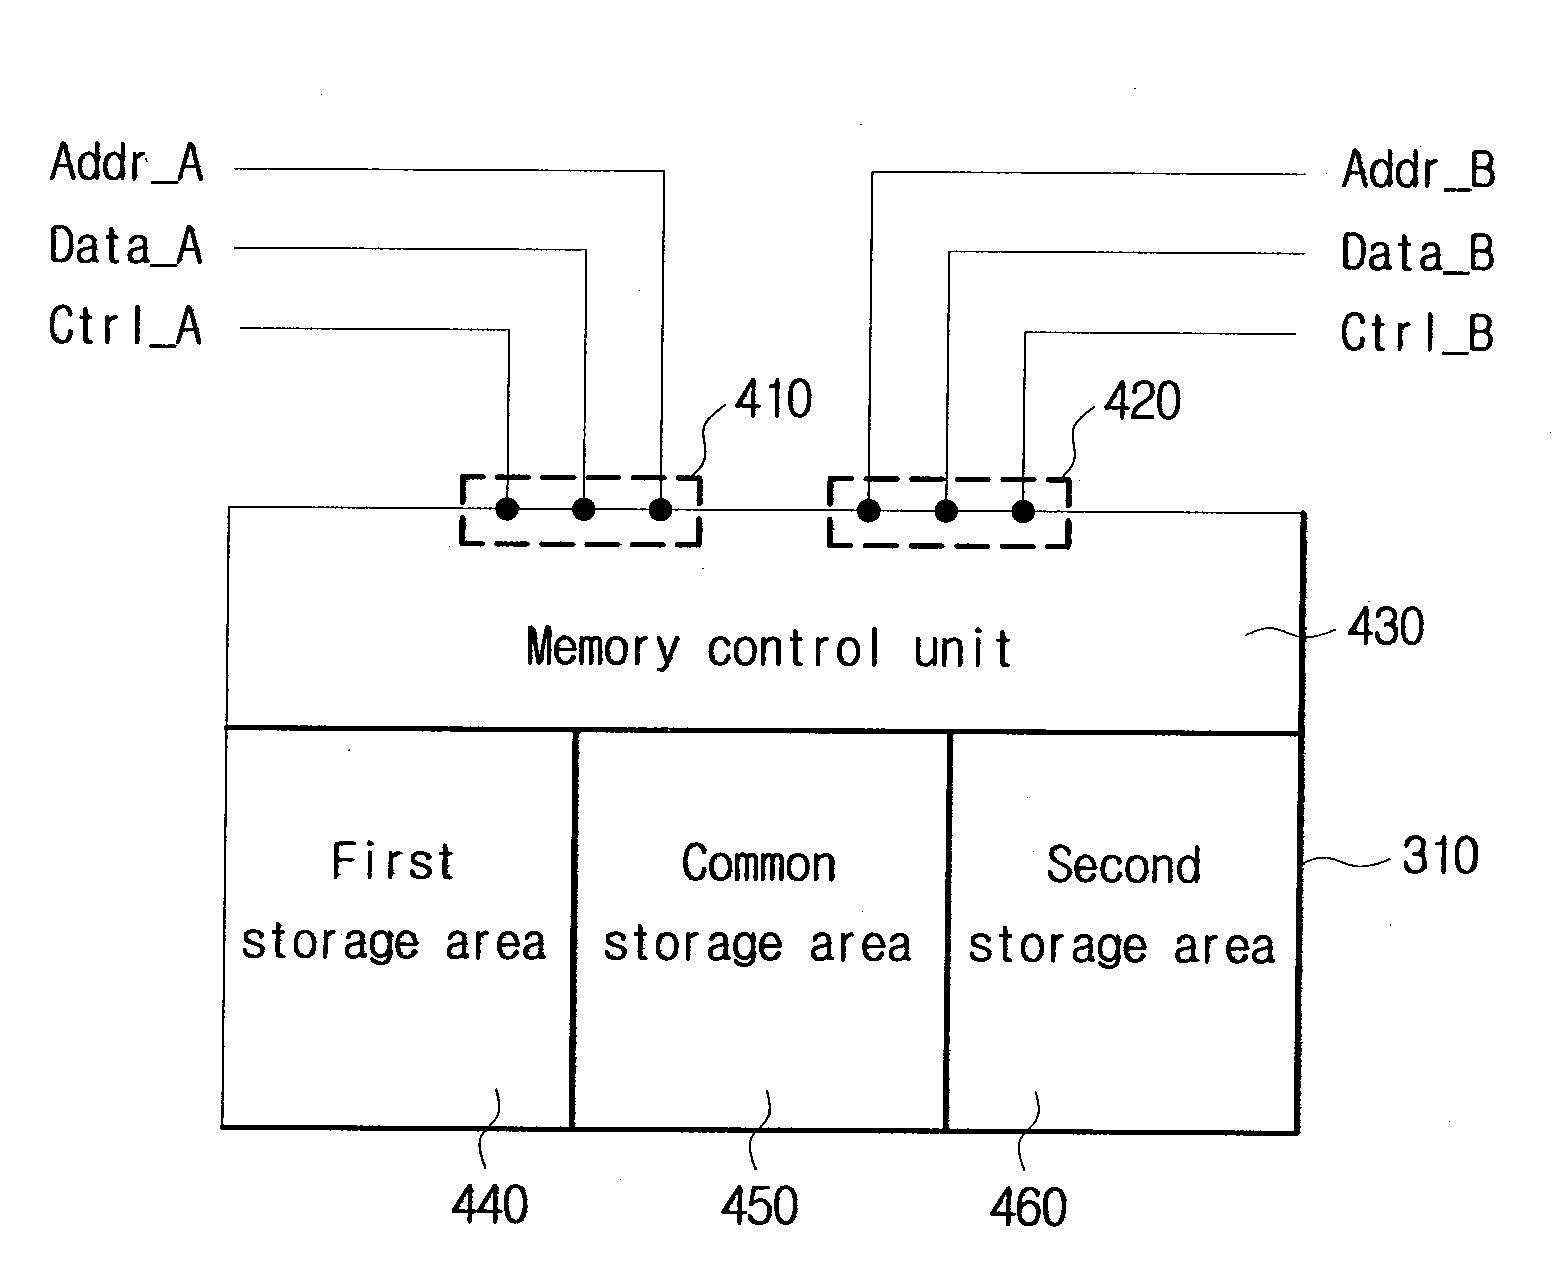 Operation Control of Shared Memory